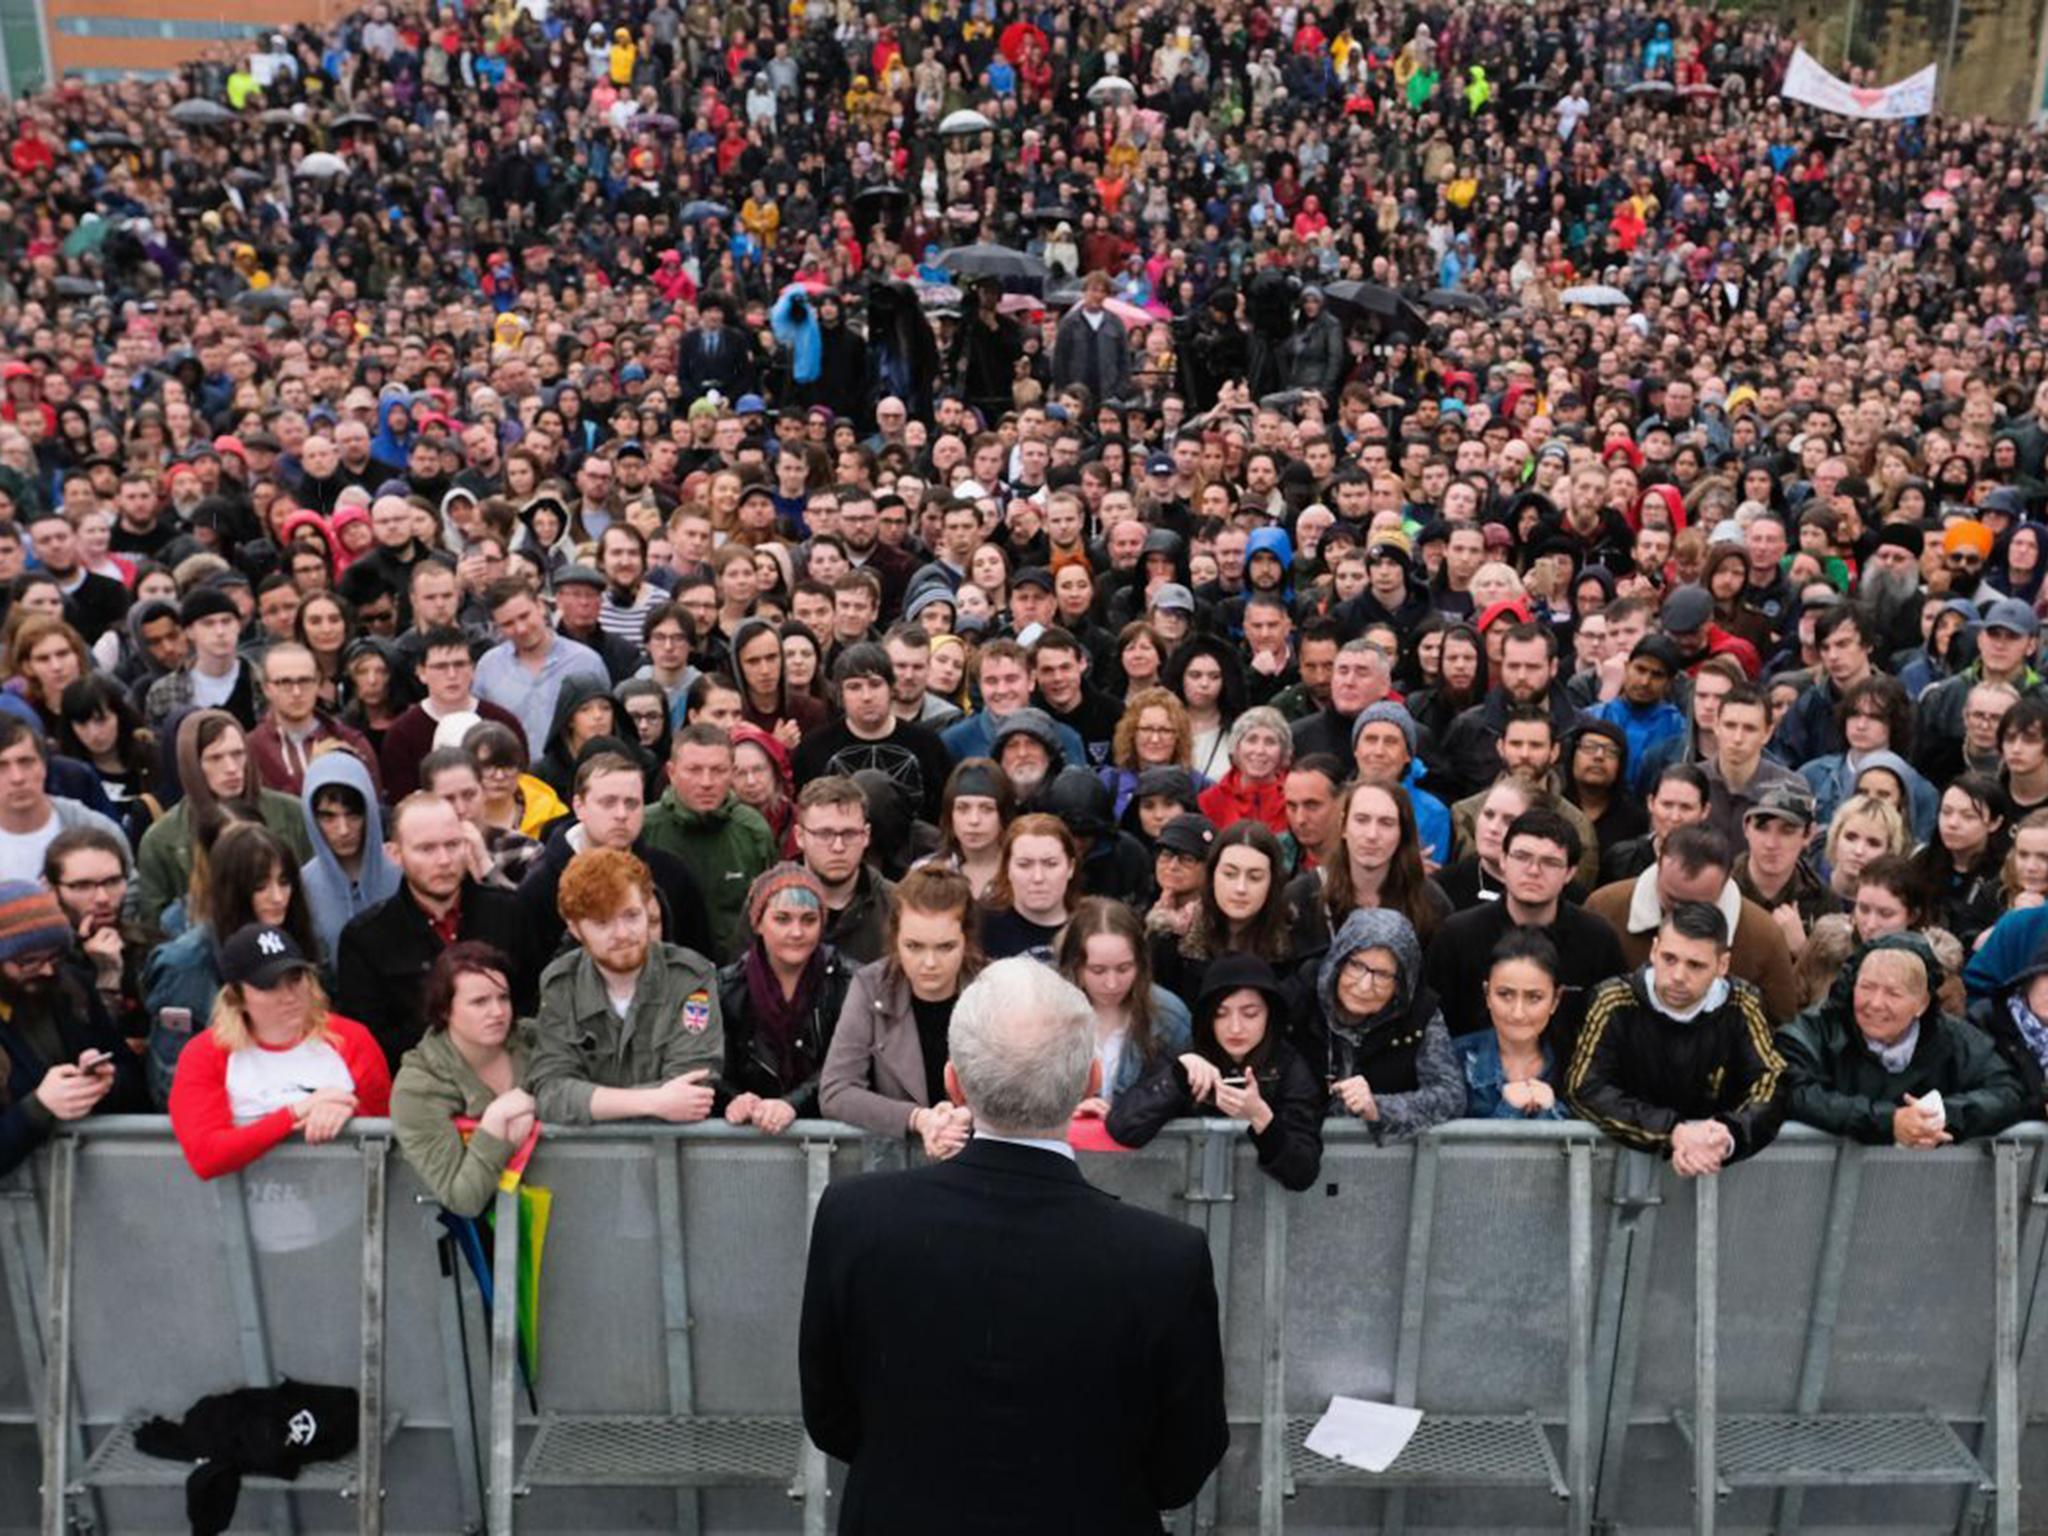 Labour leader Jeremy Corbyn is becoming increasingly popular with young voters, drawing thousands to rallies